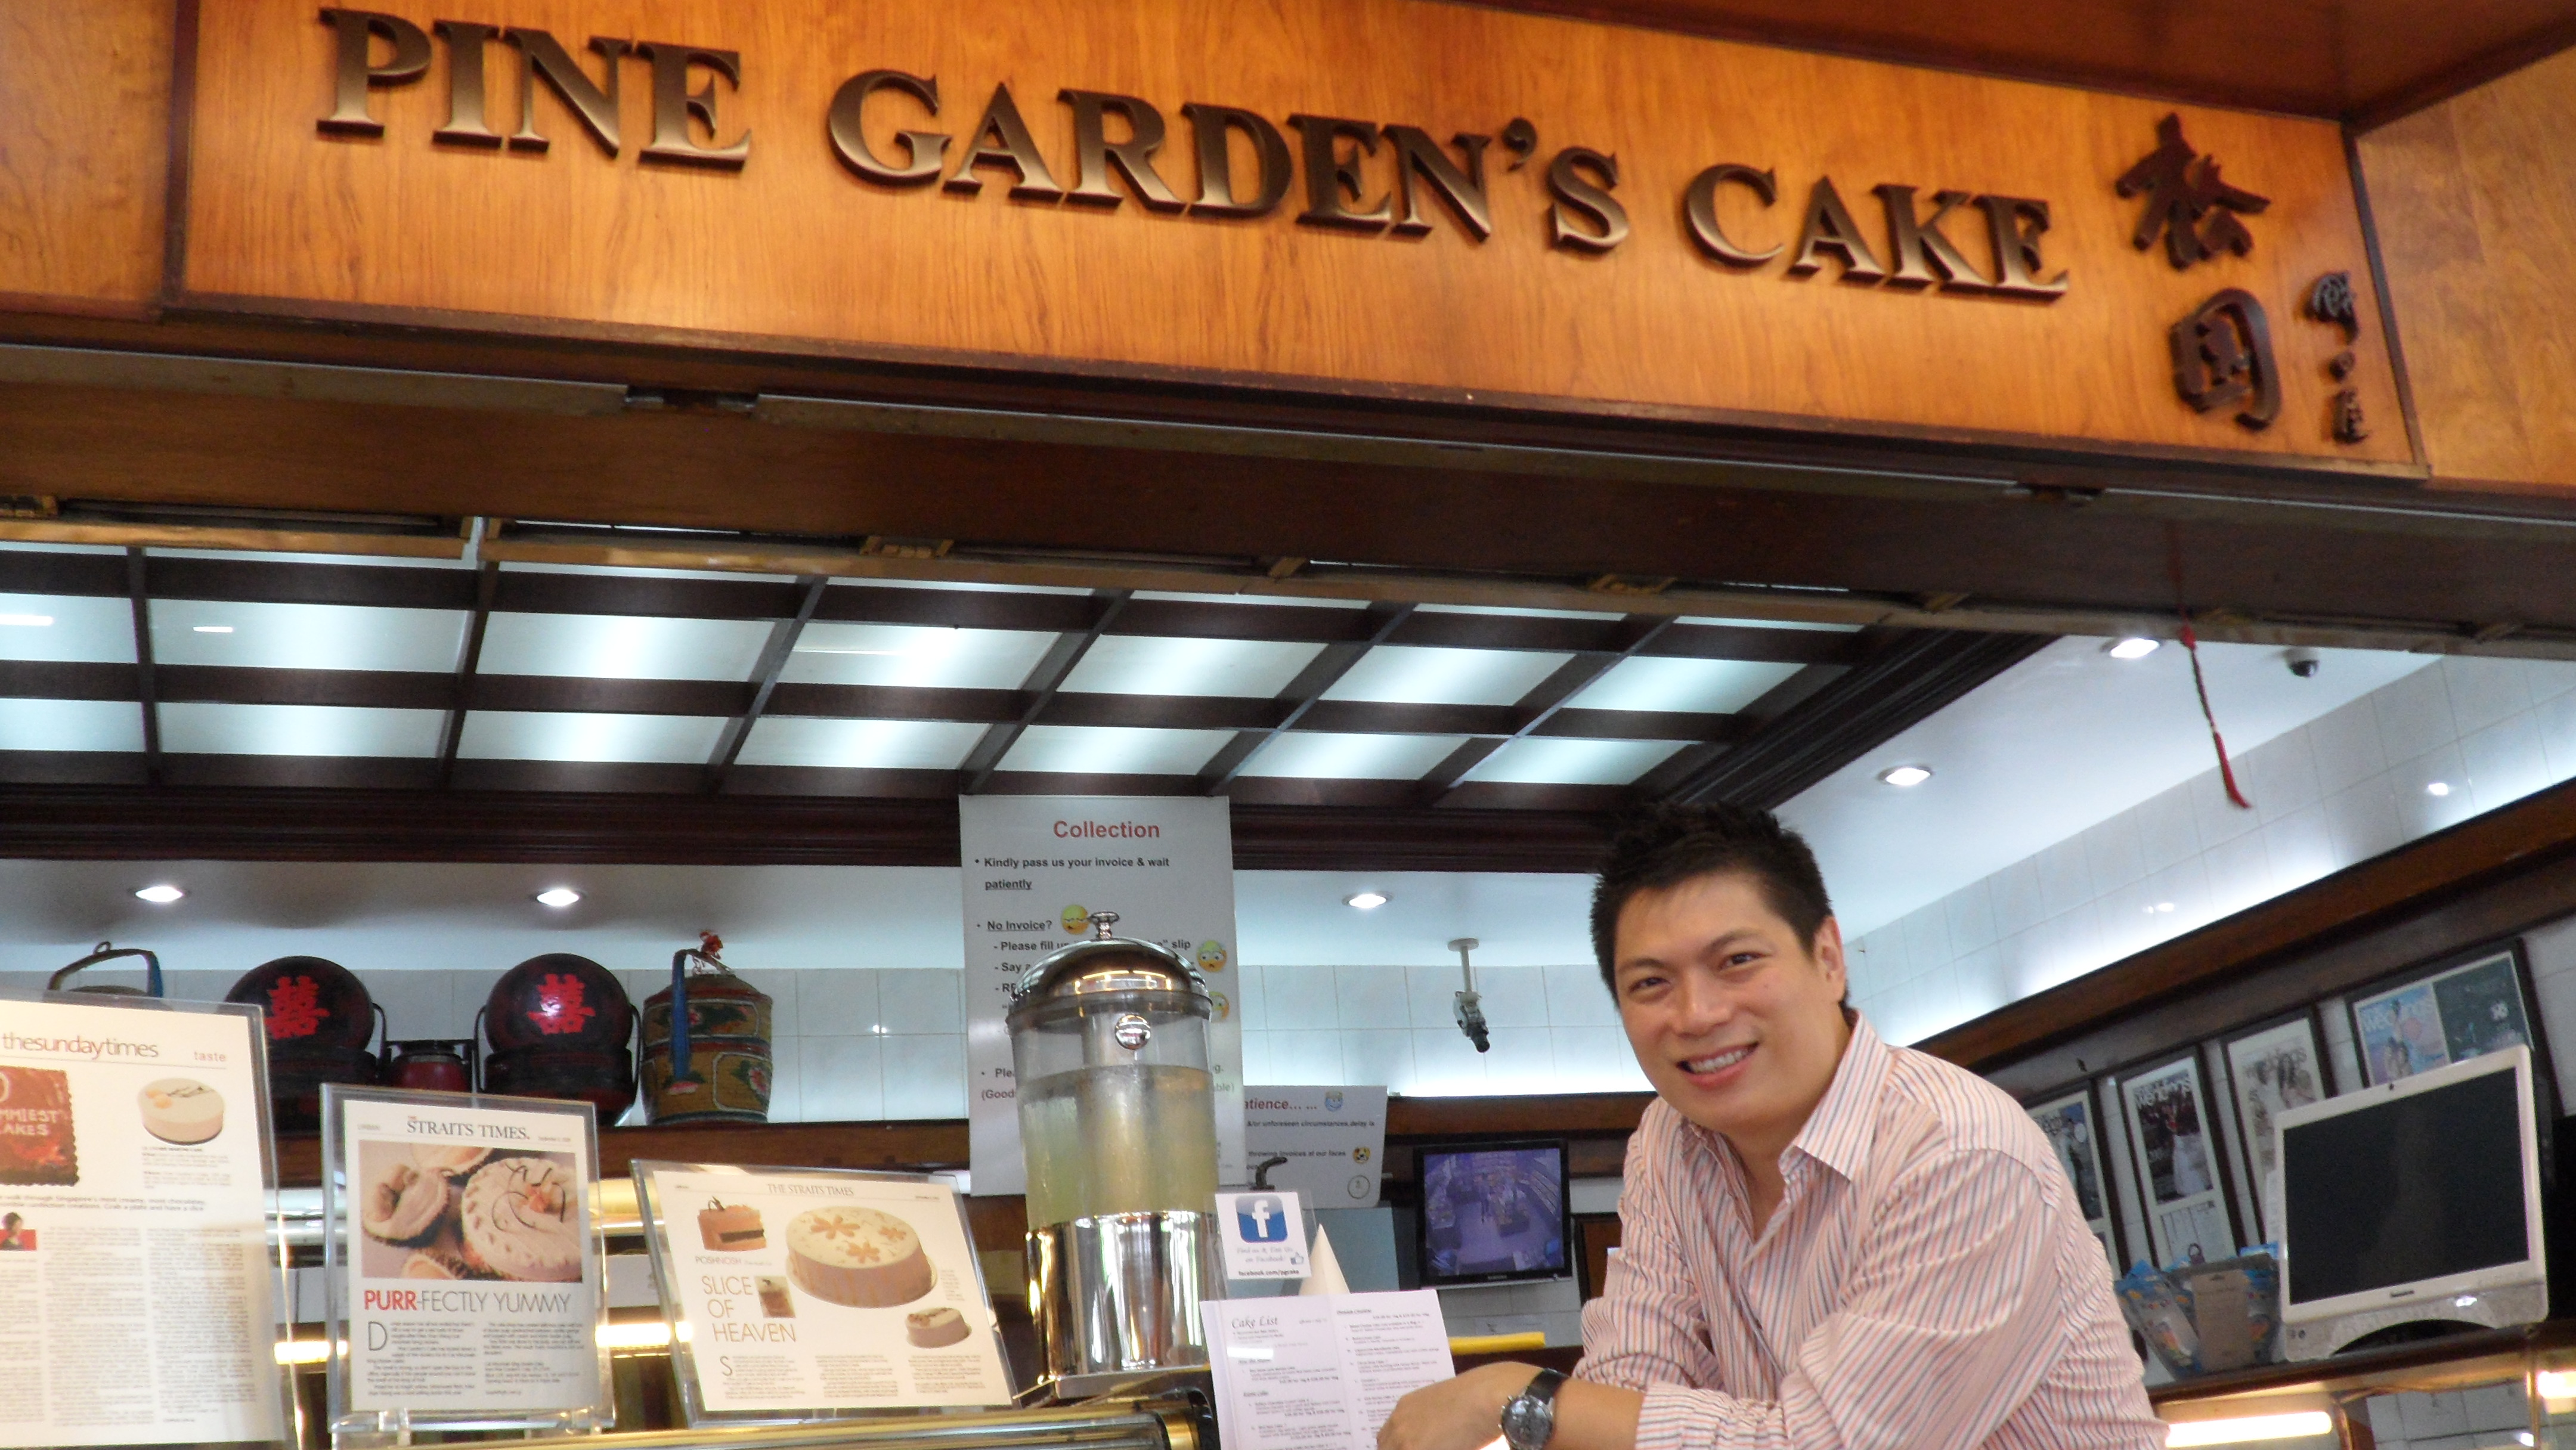 Interview With Wei Chan From Pine Garden S Cake Www Pgcake Com